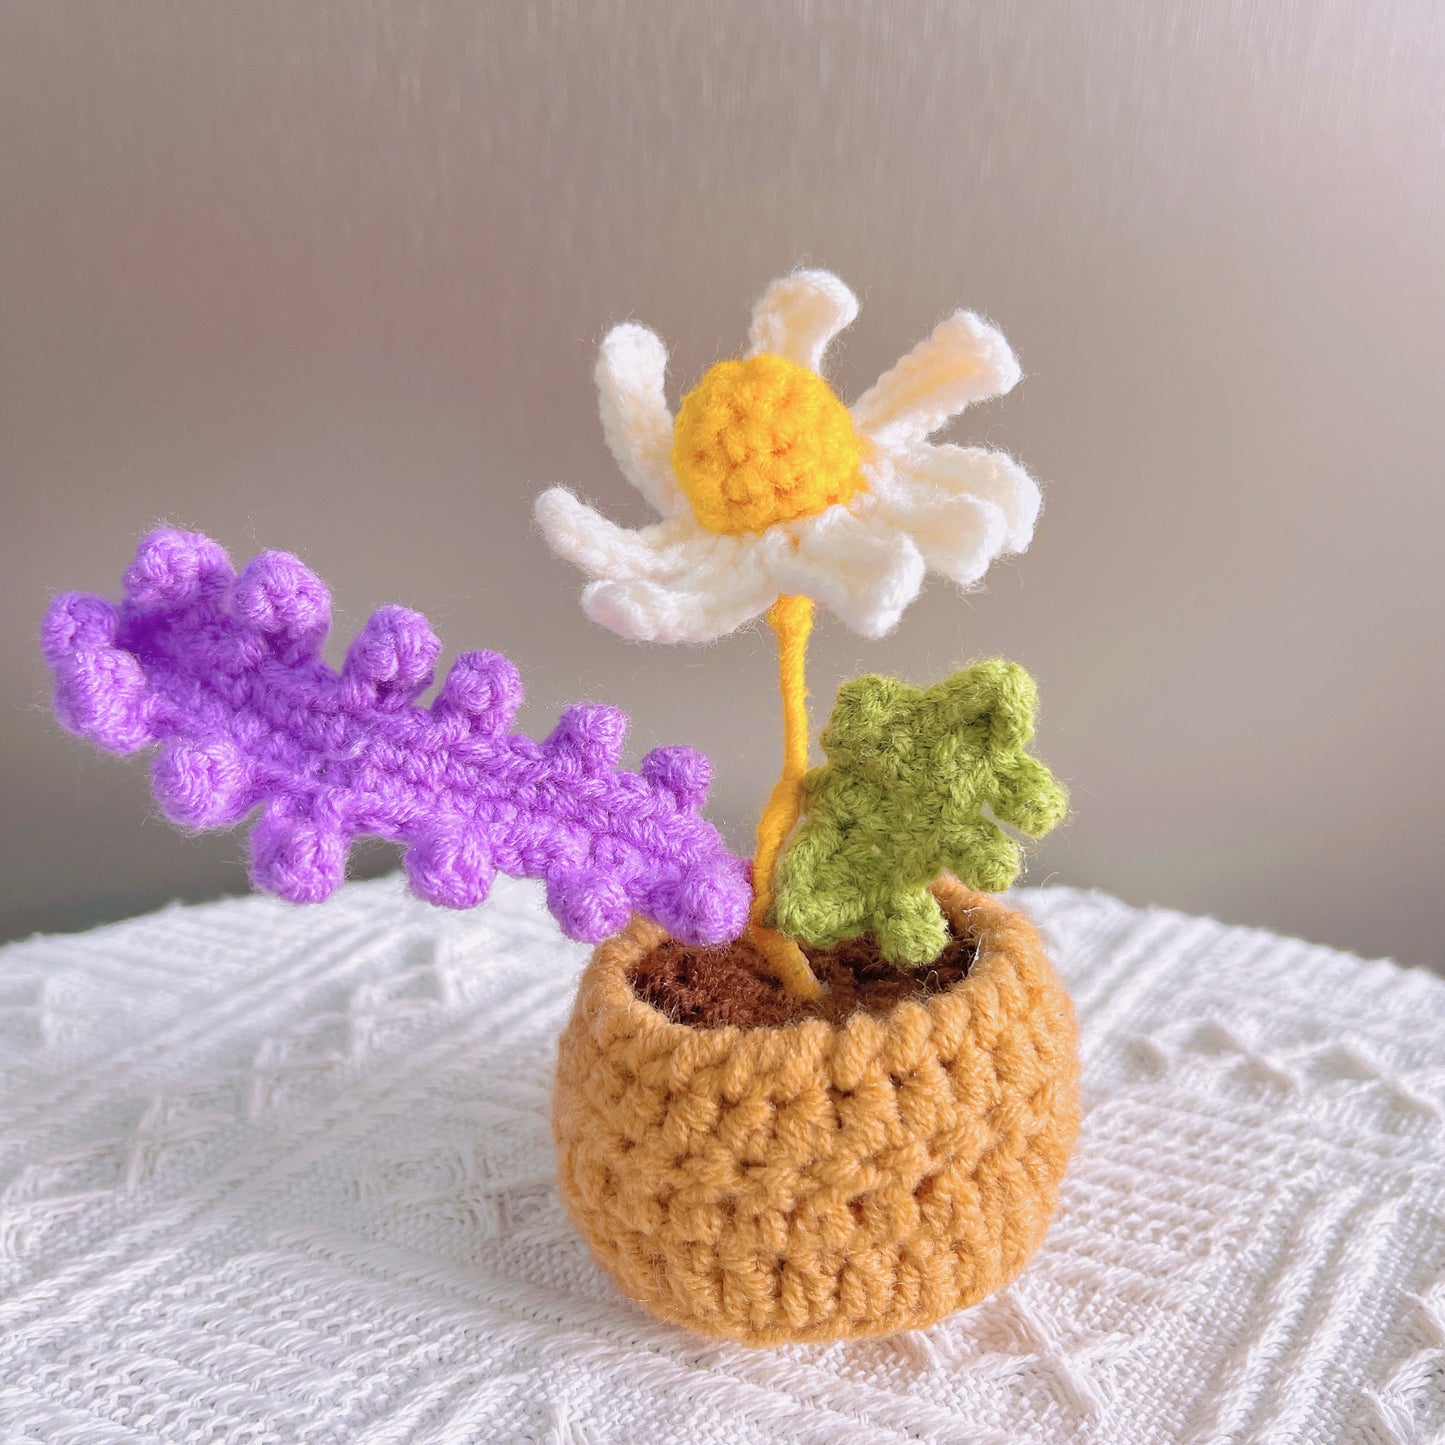 Crochet Nugget and Mini Plant Pot Bundle with Positive Quote - Recovery Inspiring Gift New Year Resolution